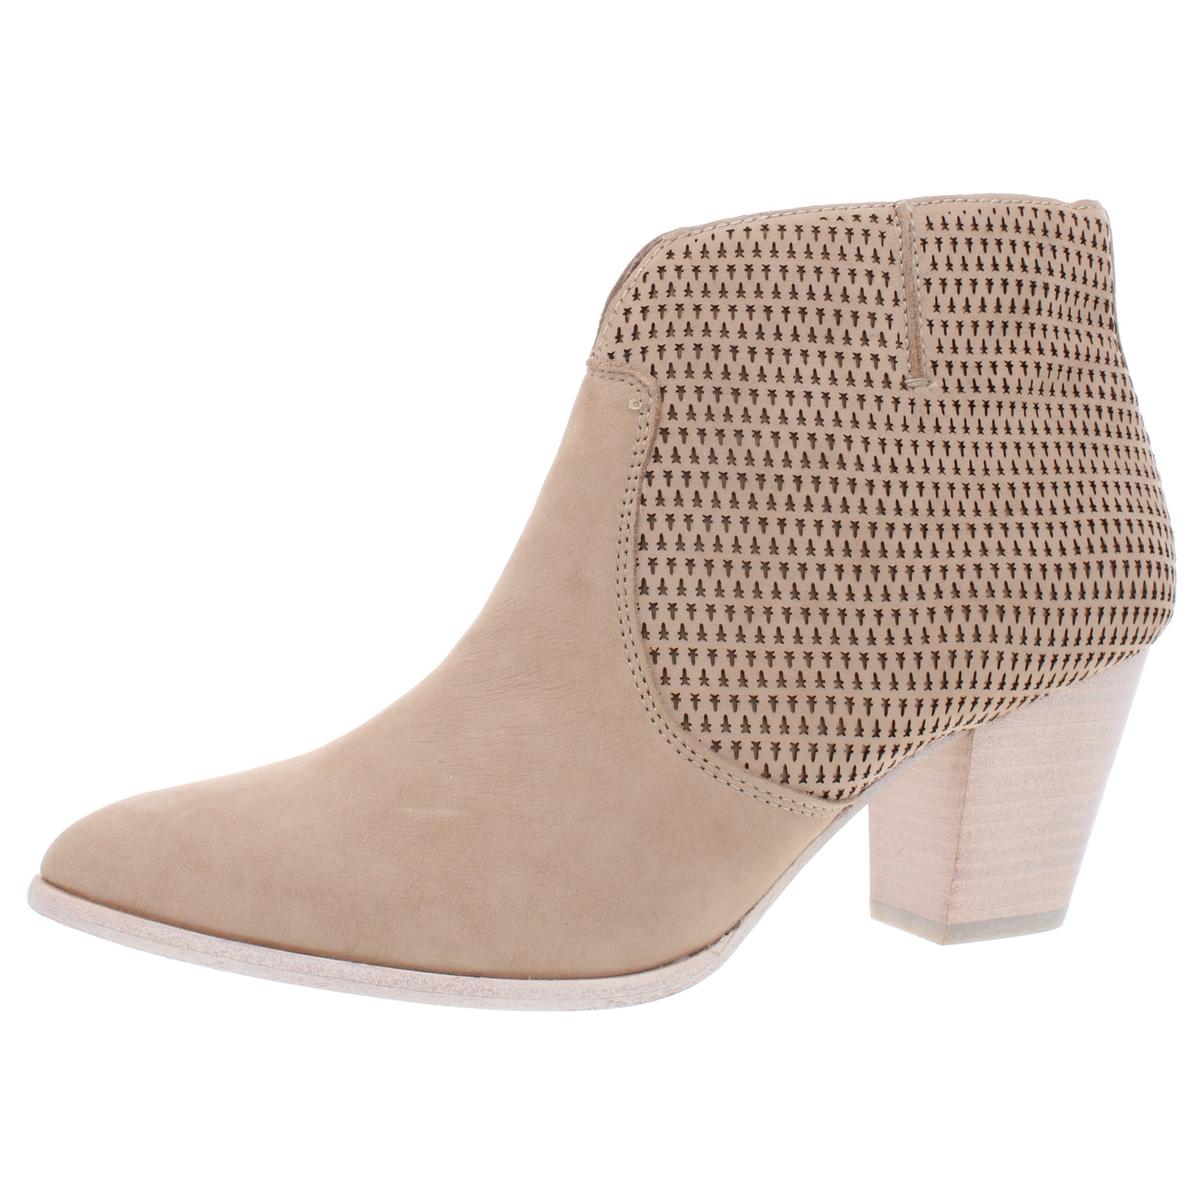 Frye Womens Jennifer Taupe Suede Ankle Booties Shoes 9.5 Medium (B,M ...